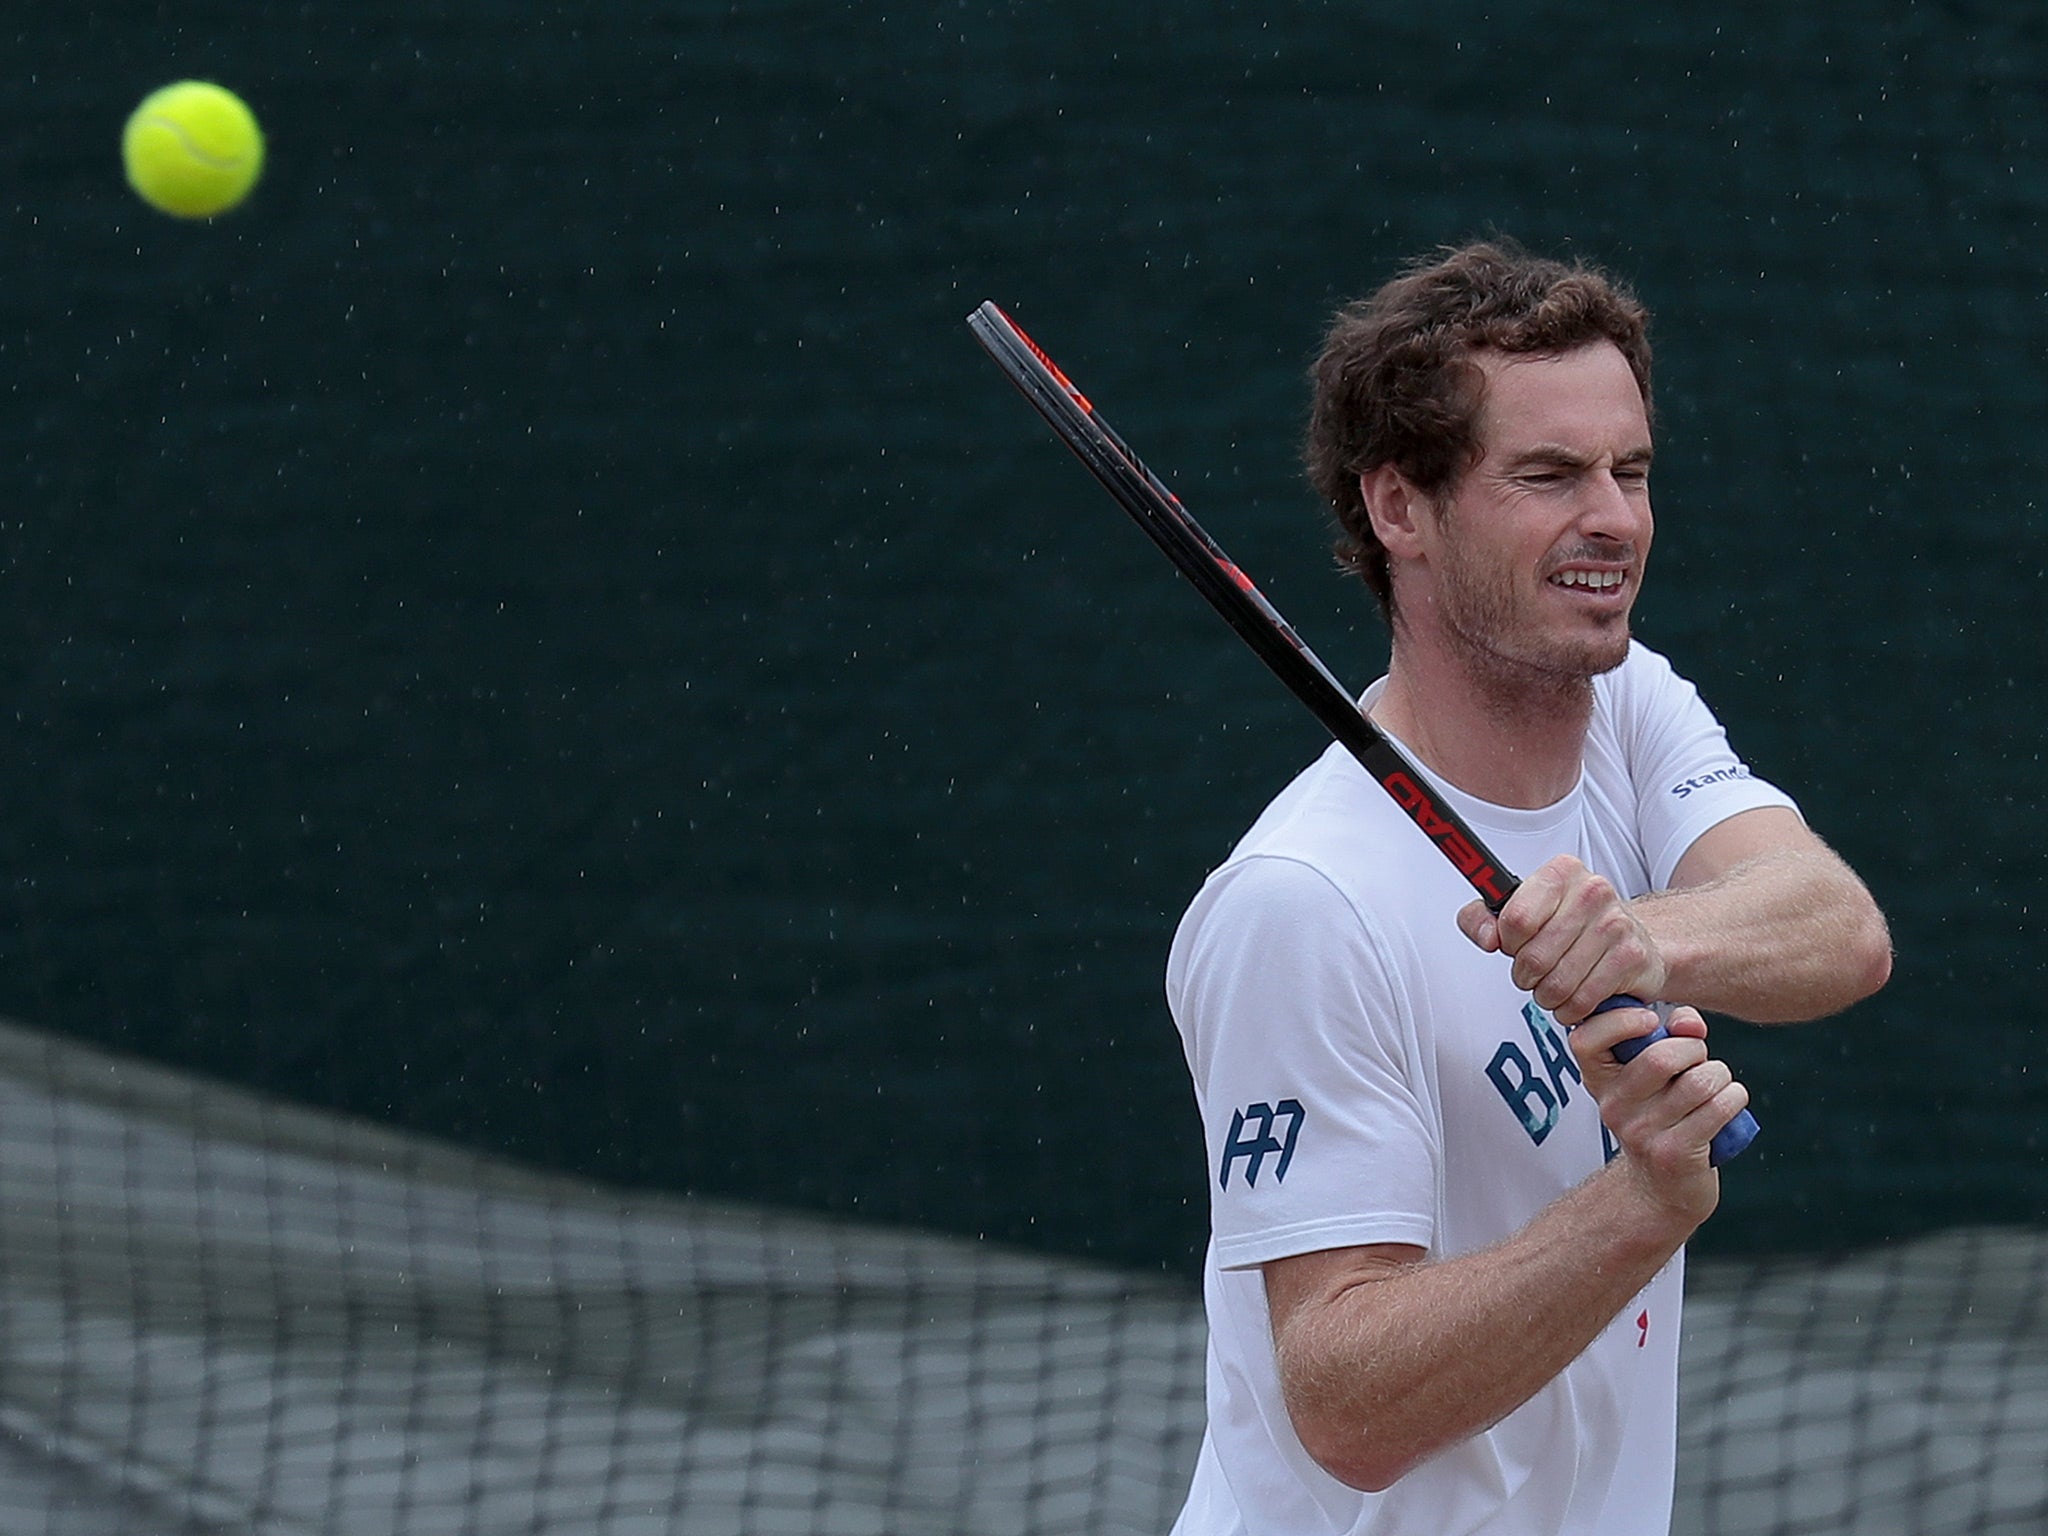 Andy Murray has won seven of his eight previous meetings with Sam Querrey